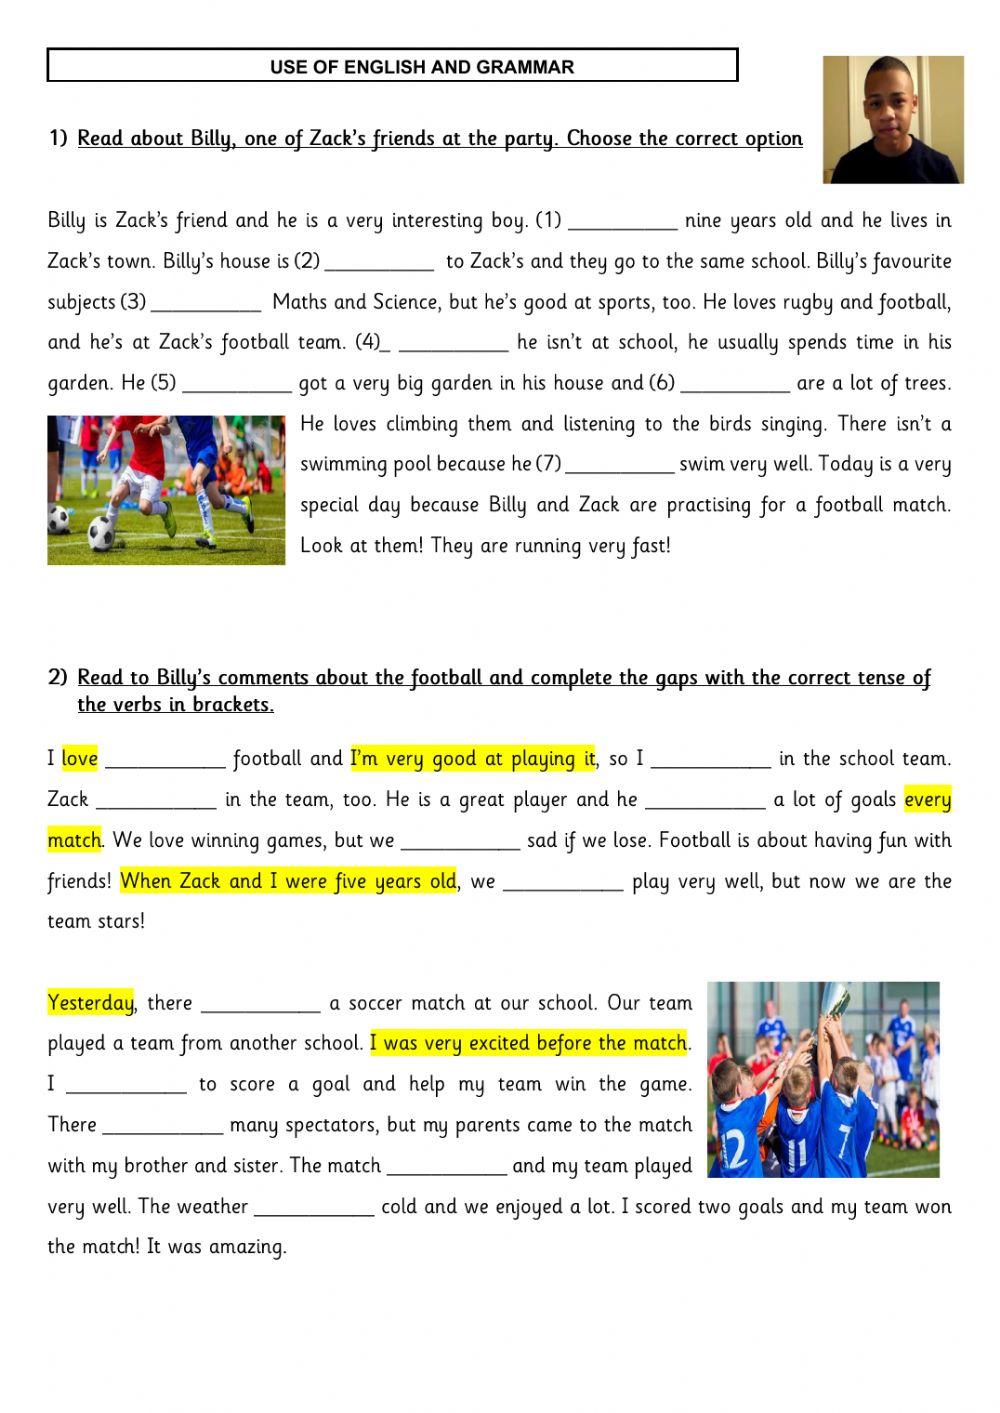 Use of English practice interactive worksheet | Live Worksheets